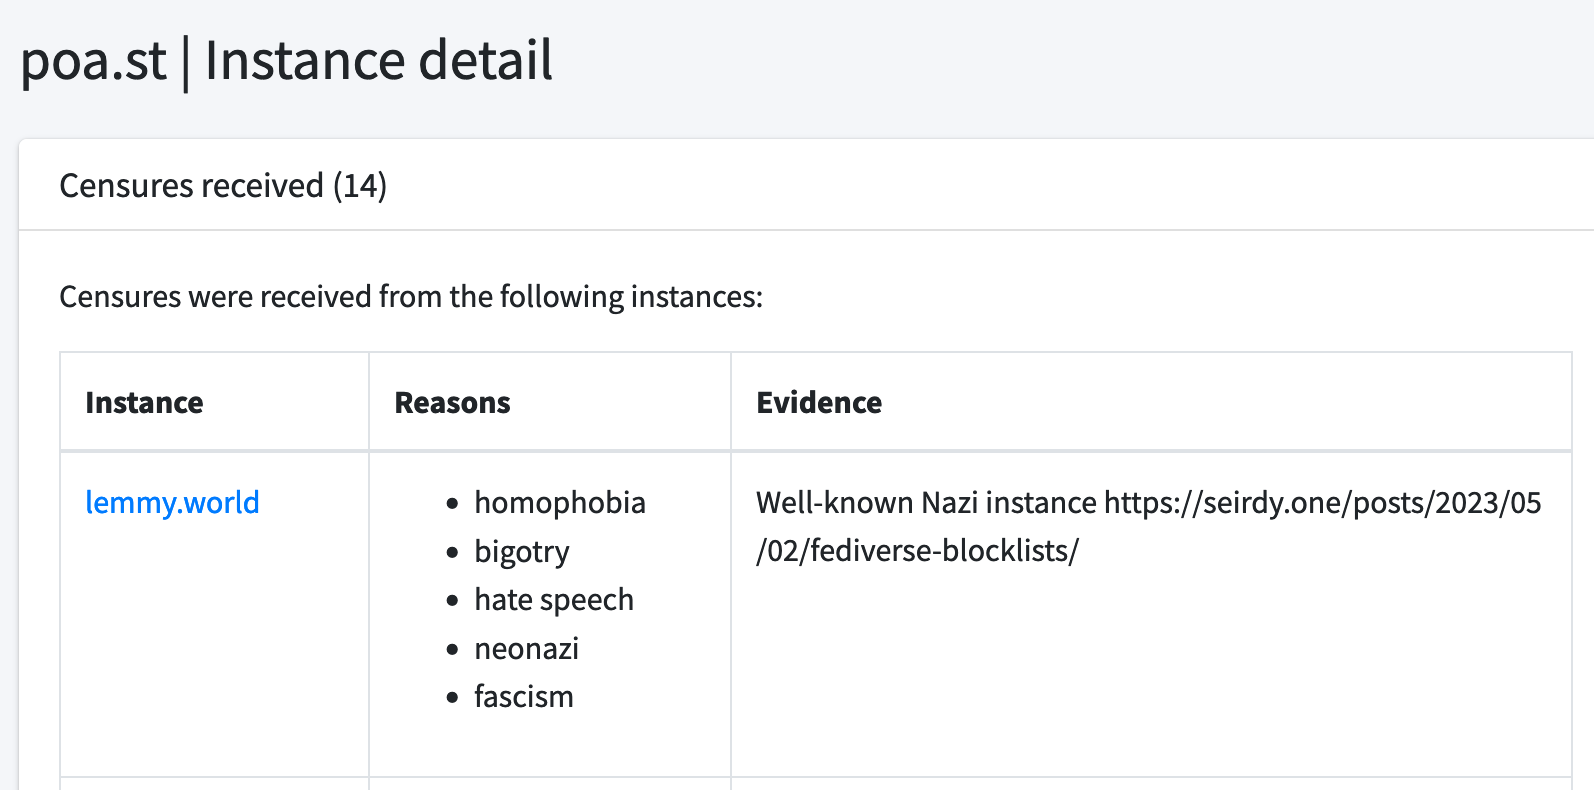 poa.st | Instance detail . Censures received (14)  Censures were received from the following instances: Instance: lemmy.world.  Reasons: homophobia, bigotry, hate speech, neonazi, fascism. Evidence: Well-known Nazi instance https://seirdy.one/posts/2023/05/02/fediverse-blocklists/